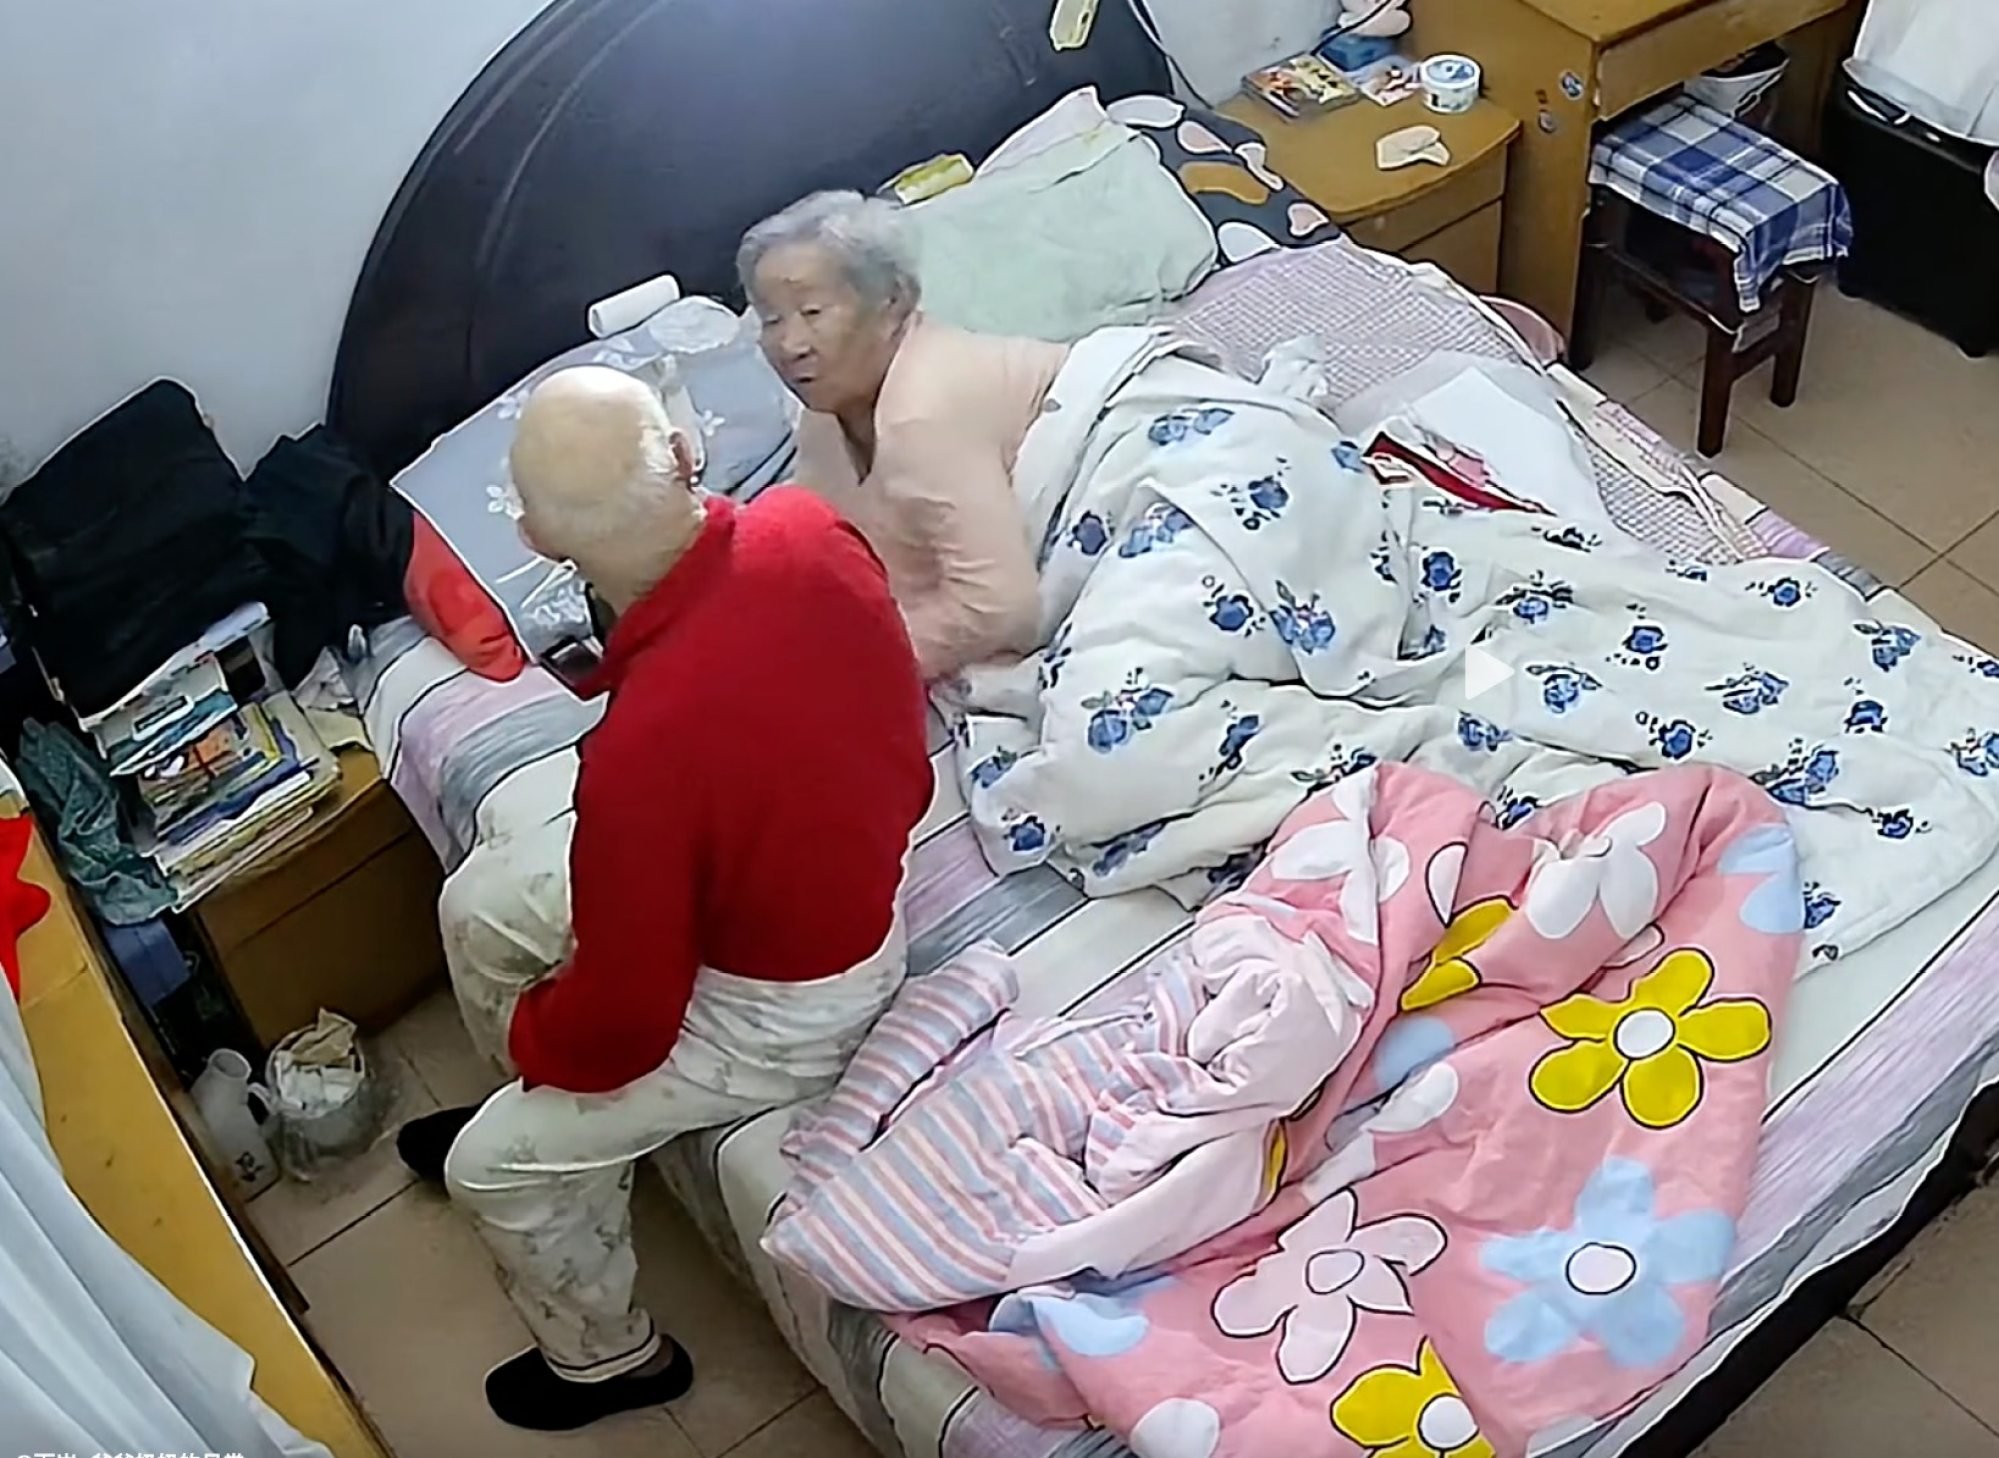 Do you love me? 100-year-old Chinese woman asks husband, 98, about his feelings in video that touches millions online South China Morning Post pic